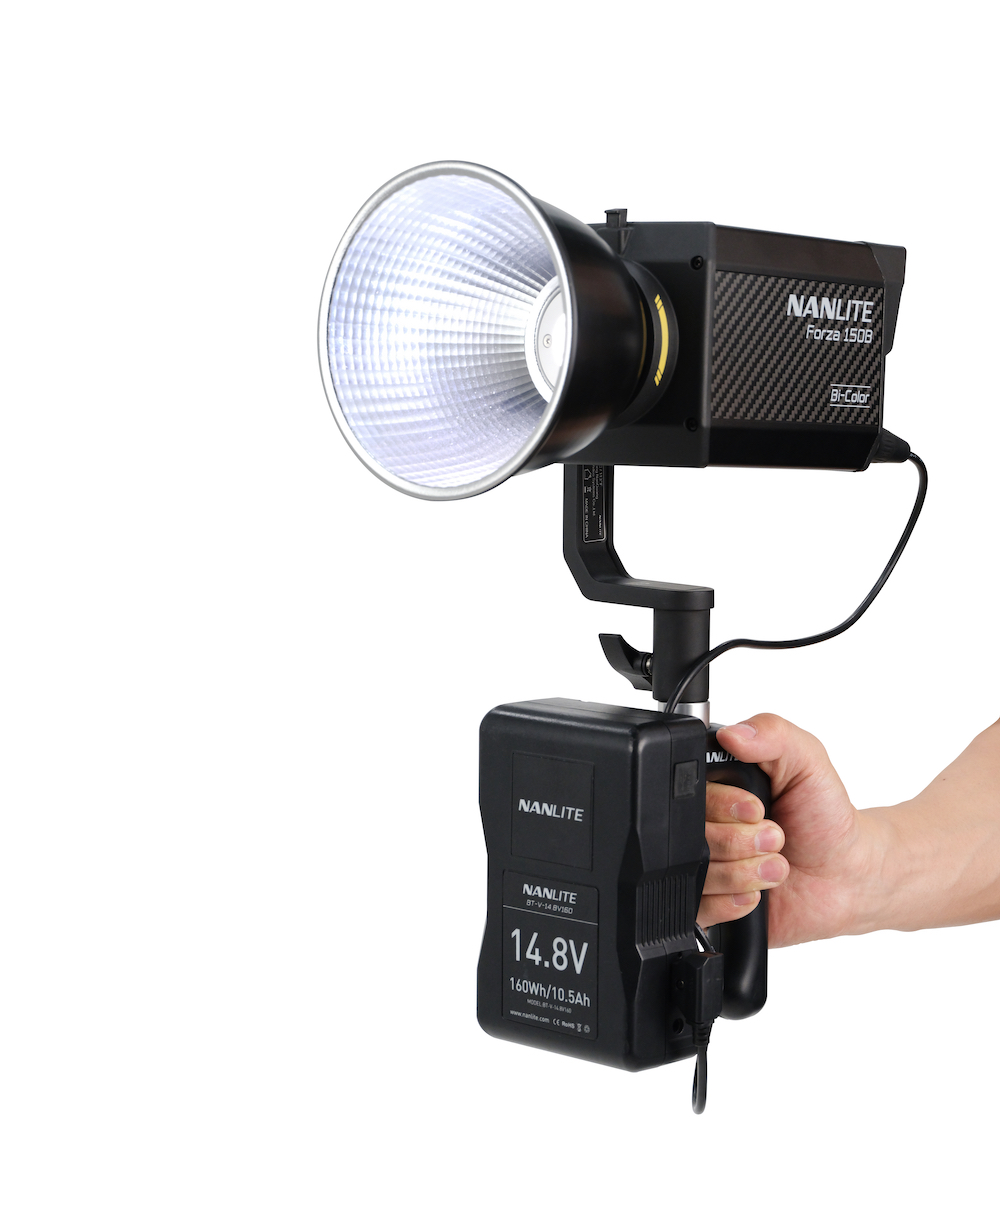 Hand-holding the Nanlite Forza 150B for on-the-go shooting